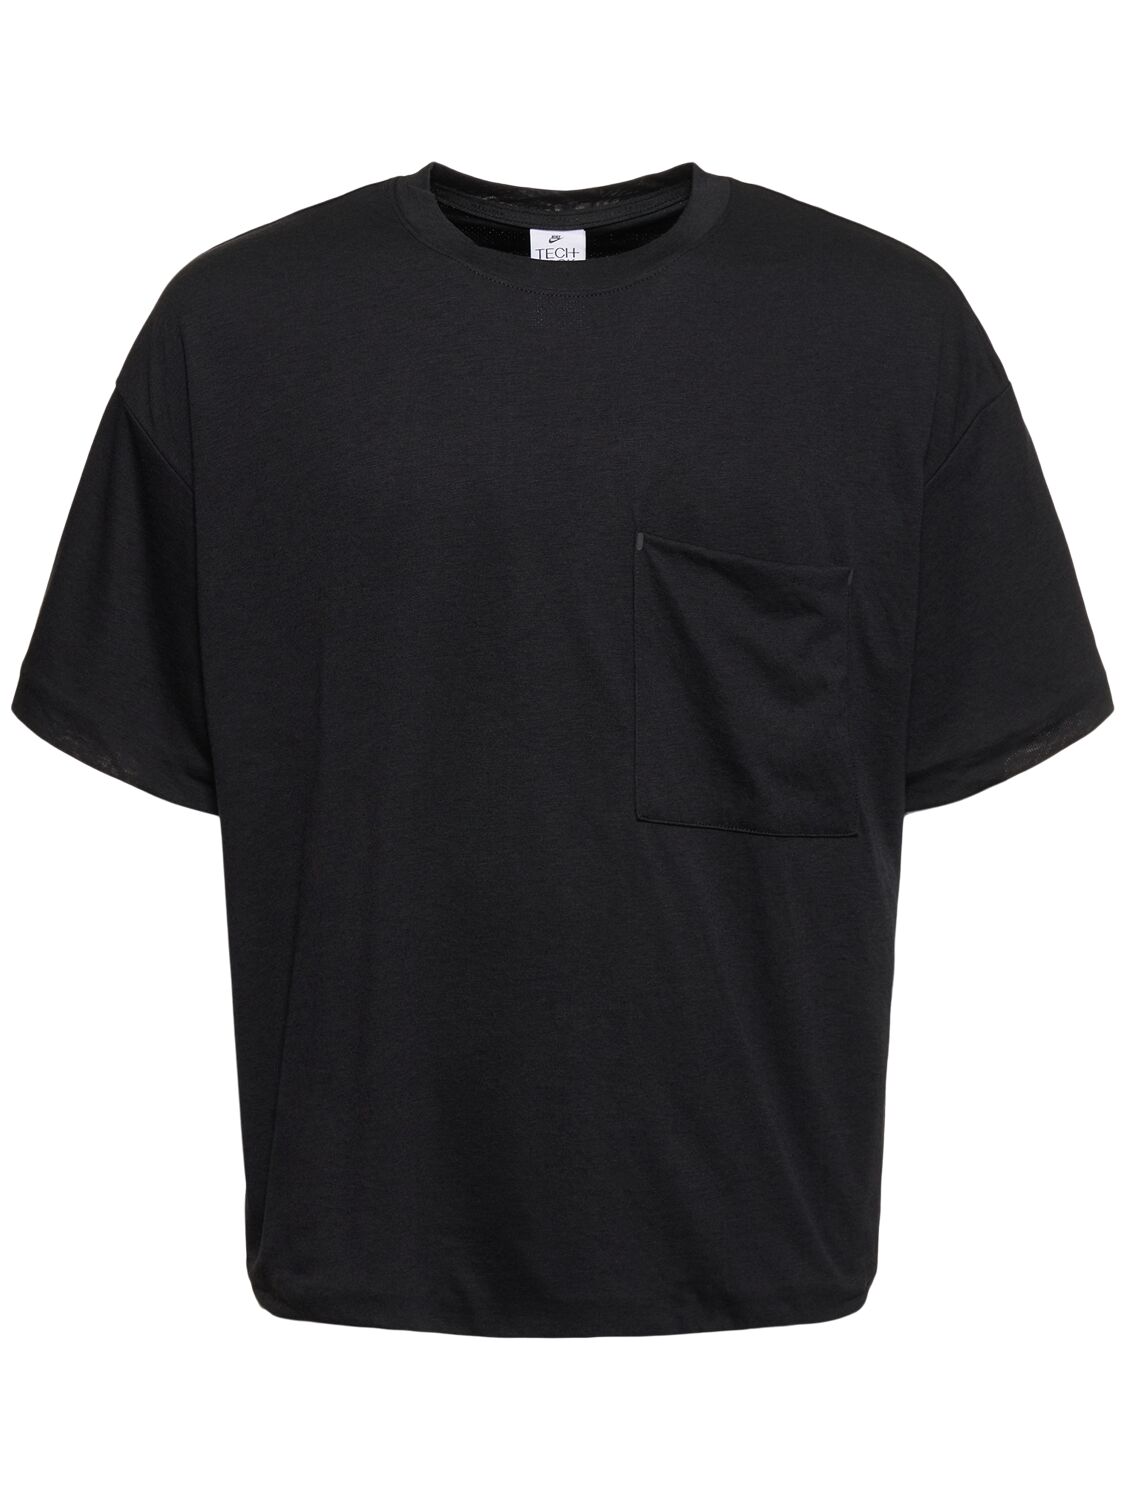 Image of Tech Pack Dri-fit Short-sleeve Top